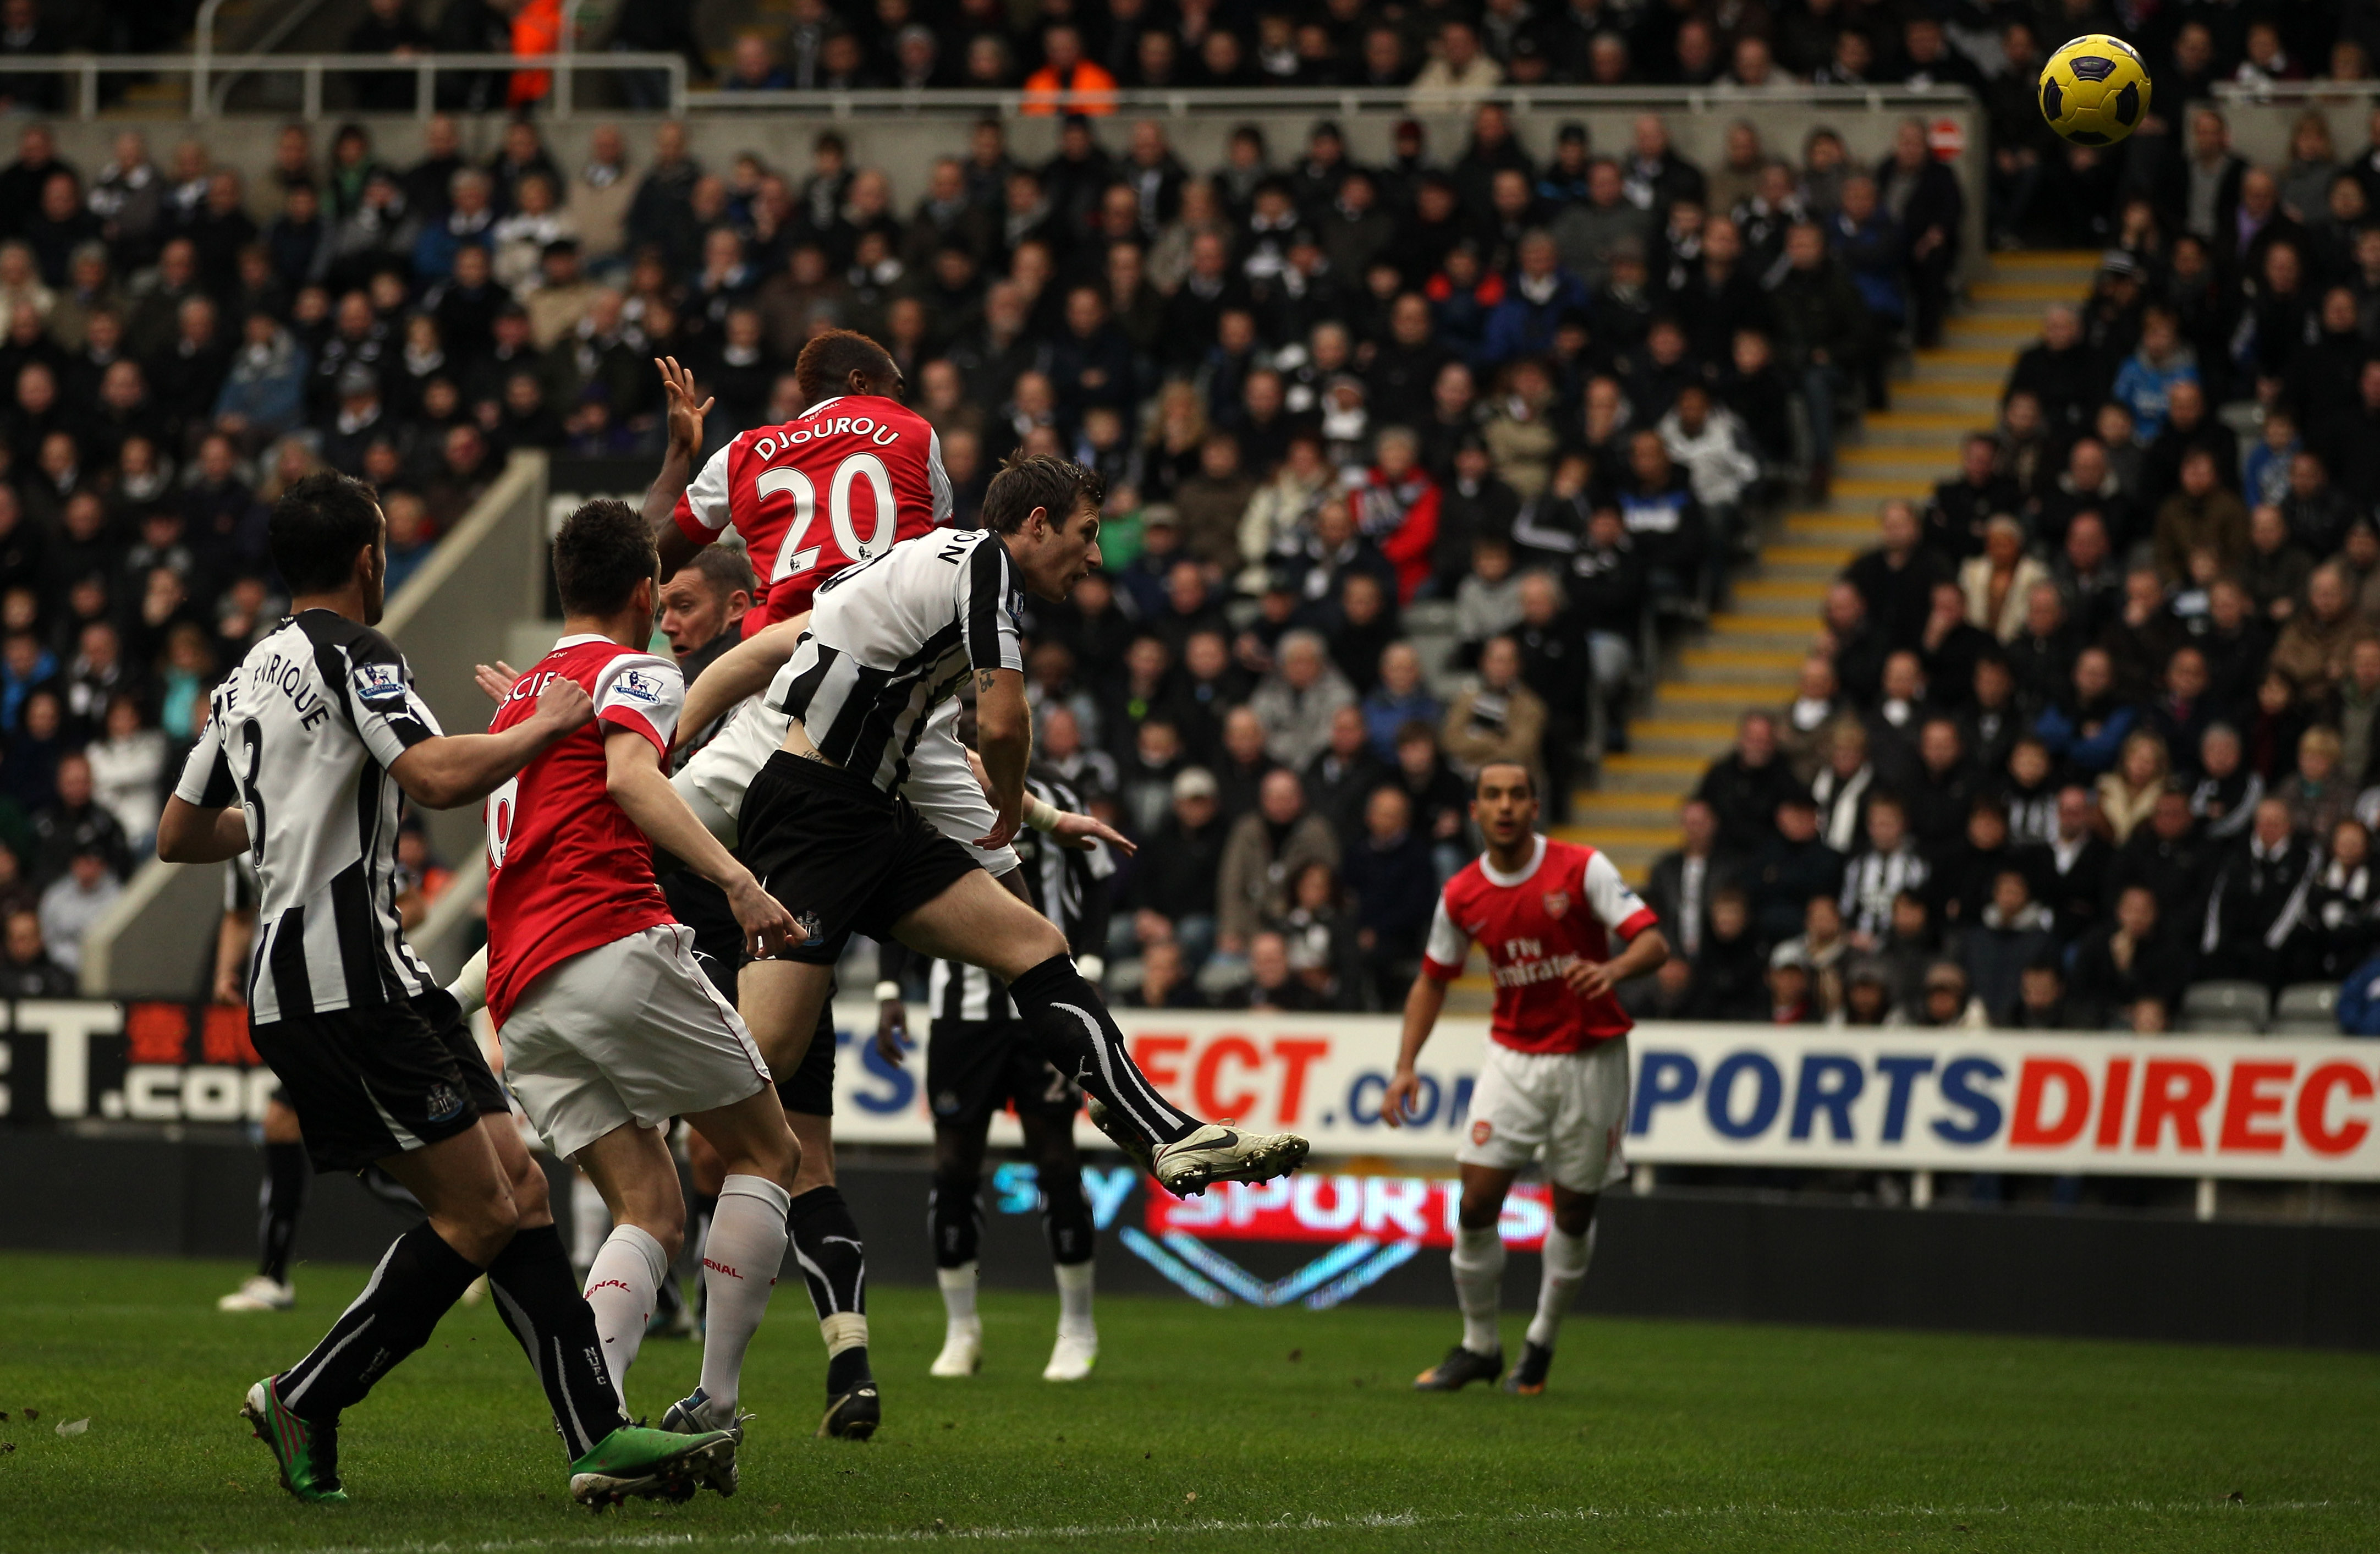 NEWCASTLE UPON TYNE, ENGLAND - FEBRUARY 05:  Johan Djourou of Arsenal scores the second goal during the Barclays Premier League match between Newcastle United and Arsenal at St James' Park on February 5, 2011 in Newcastle upon Tyne, England.  (Photo by Ri